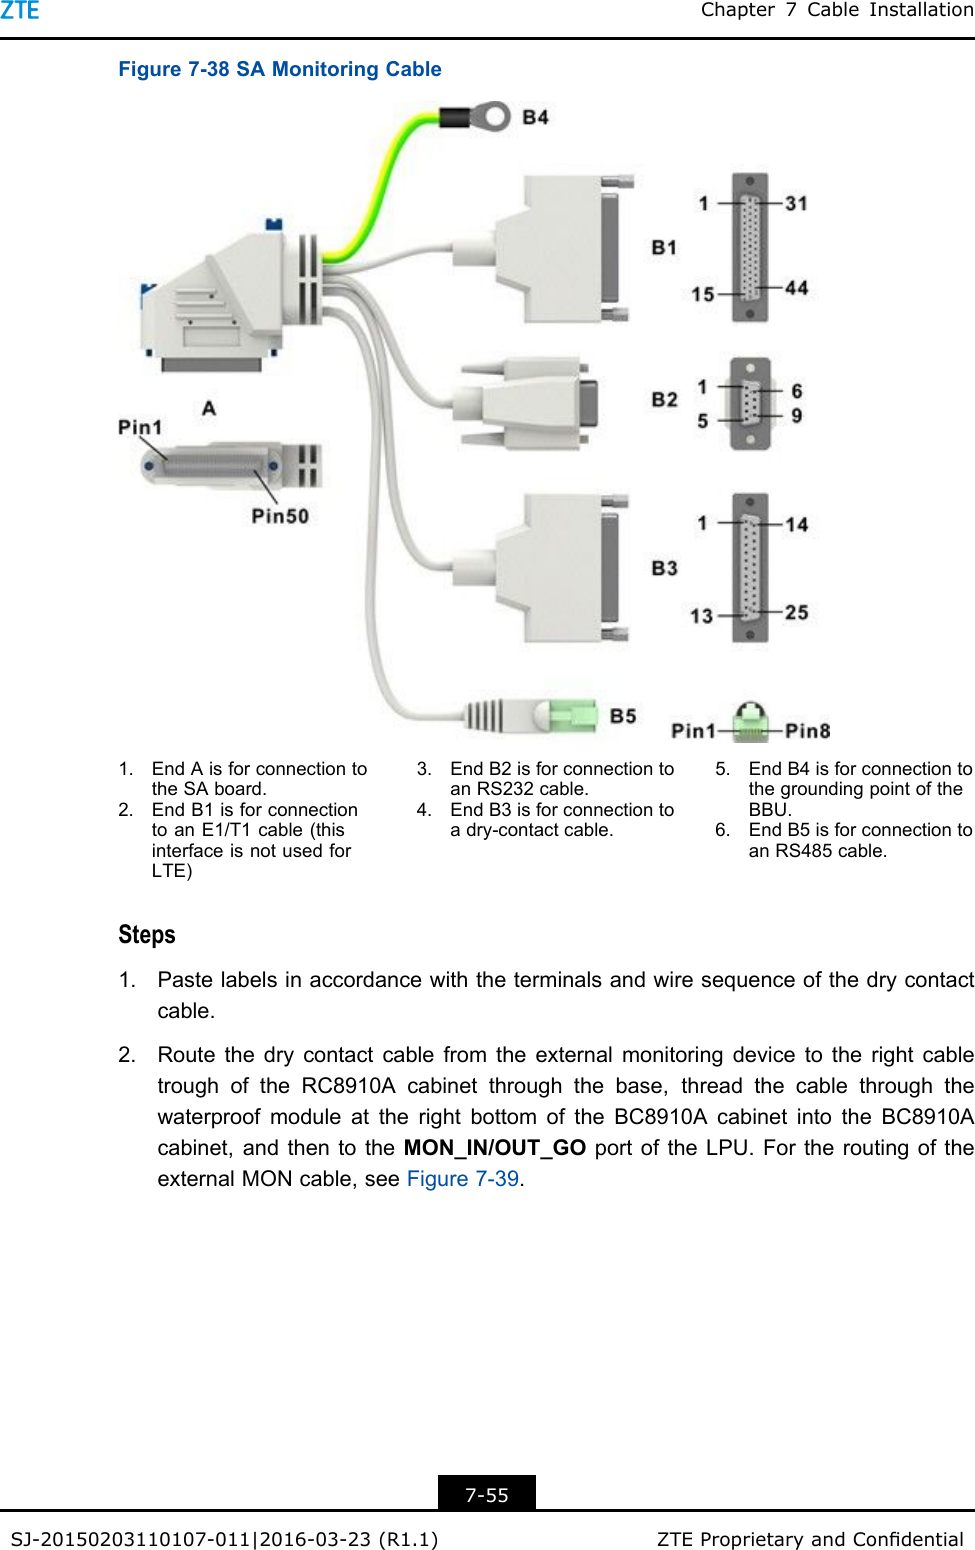 Chapter7CableInstallationFigure7-38SAMonitoringCable1.EndAisforconnectiontotheSAboard.2.EndB1isforconnectiontoanE1/T1cable(thisinterfaceisnotusedforLTE)3.EndB2isforconnectiontoanRS232cable.4.EndB3isforconnectiontoadry-contactcable.5.EndB4isforconnectiontothegroundingpointoftheBBU.6.EndB5isforconnectiontoanRS485cable.Steps1.Pastelabelsinaccordancewiththeterminalsandwiresequenceofthedrycontactcable.2.RoutethedrycontactcablefromtheexternalmonitoringdevicetotherightcabletroughoftheRC8910Acabinetthroughthebase,threadthecablethroughthewaterproofmoduleattherightbottomoftheBC8910AcabinetintotheBC8910Acabinet,andthentotheMON_IN/OUT_GOportoftheLPU.FortheroutingoftheexternalMONcable,seeFigure7-39.7-55SJ-20150203110107-011|2016-03-23(R1.1)ZTEProprietaryandCondential